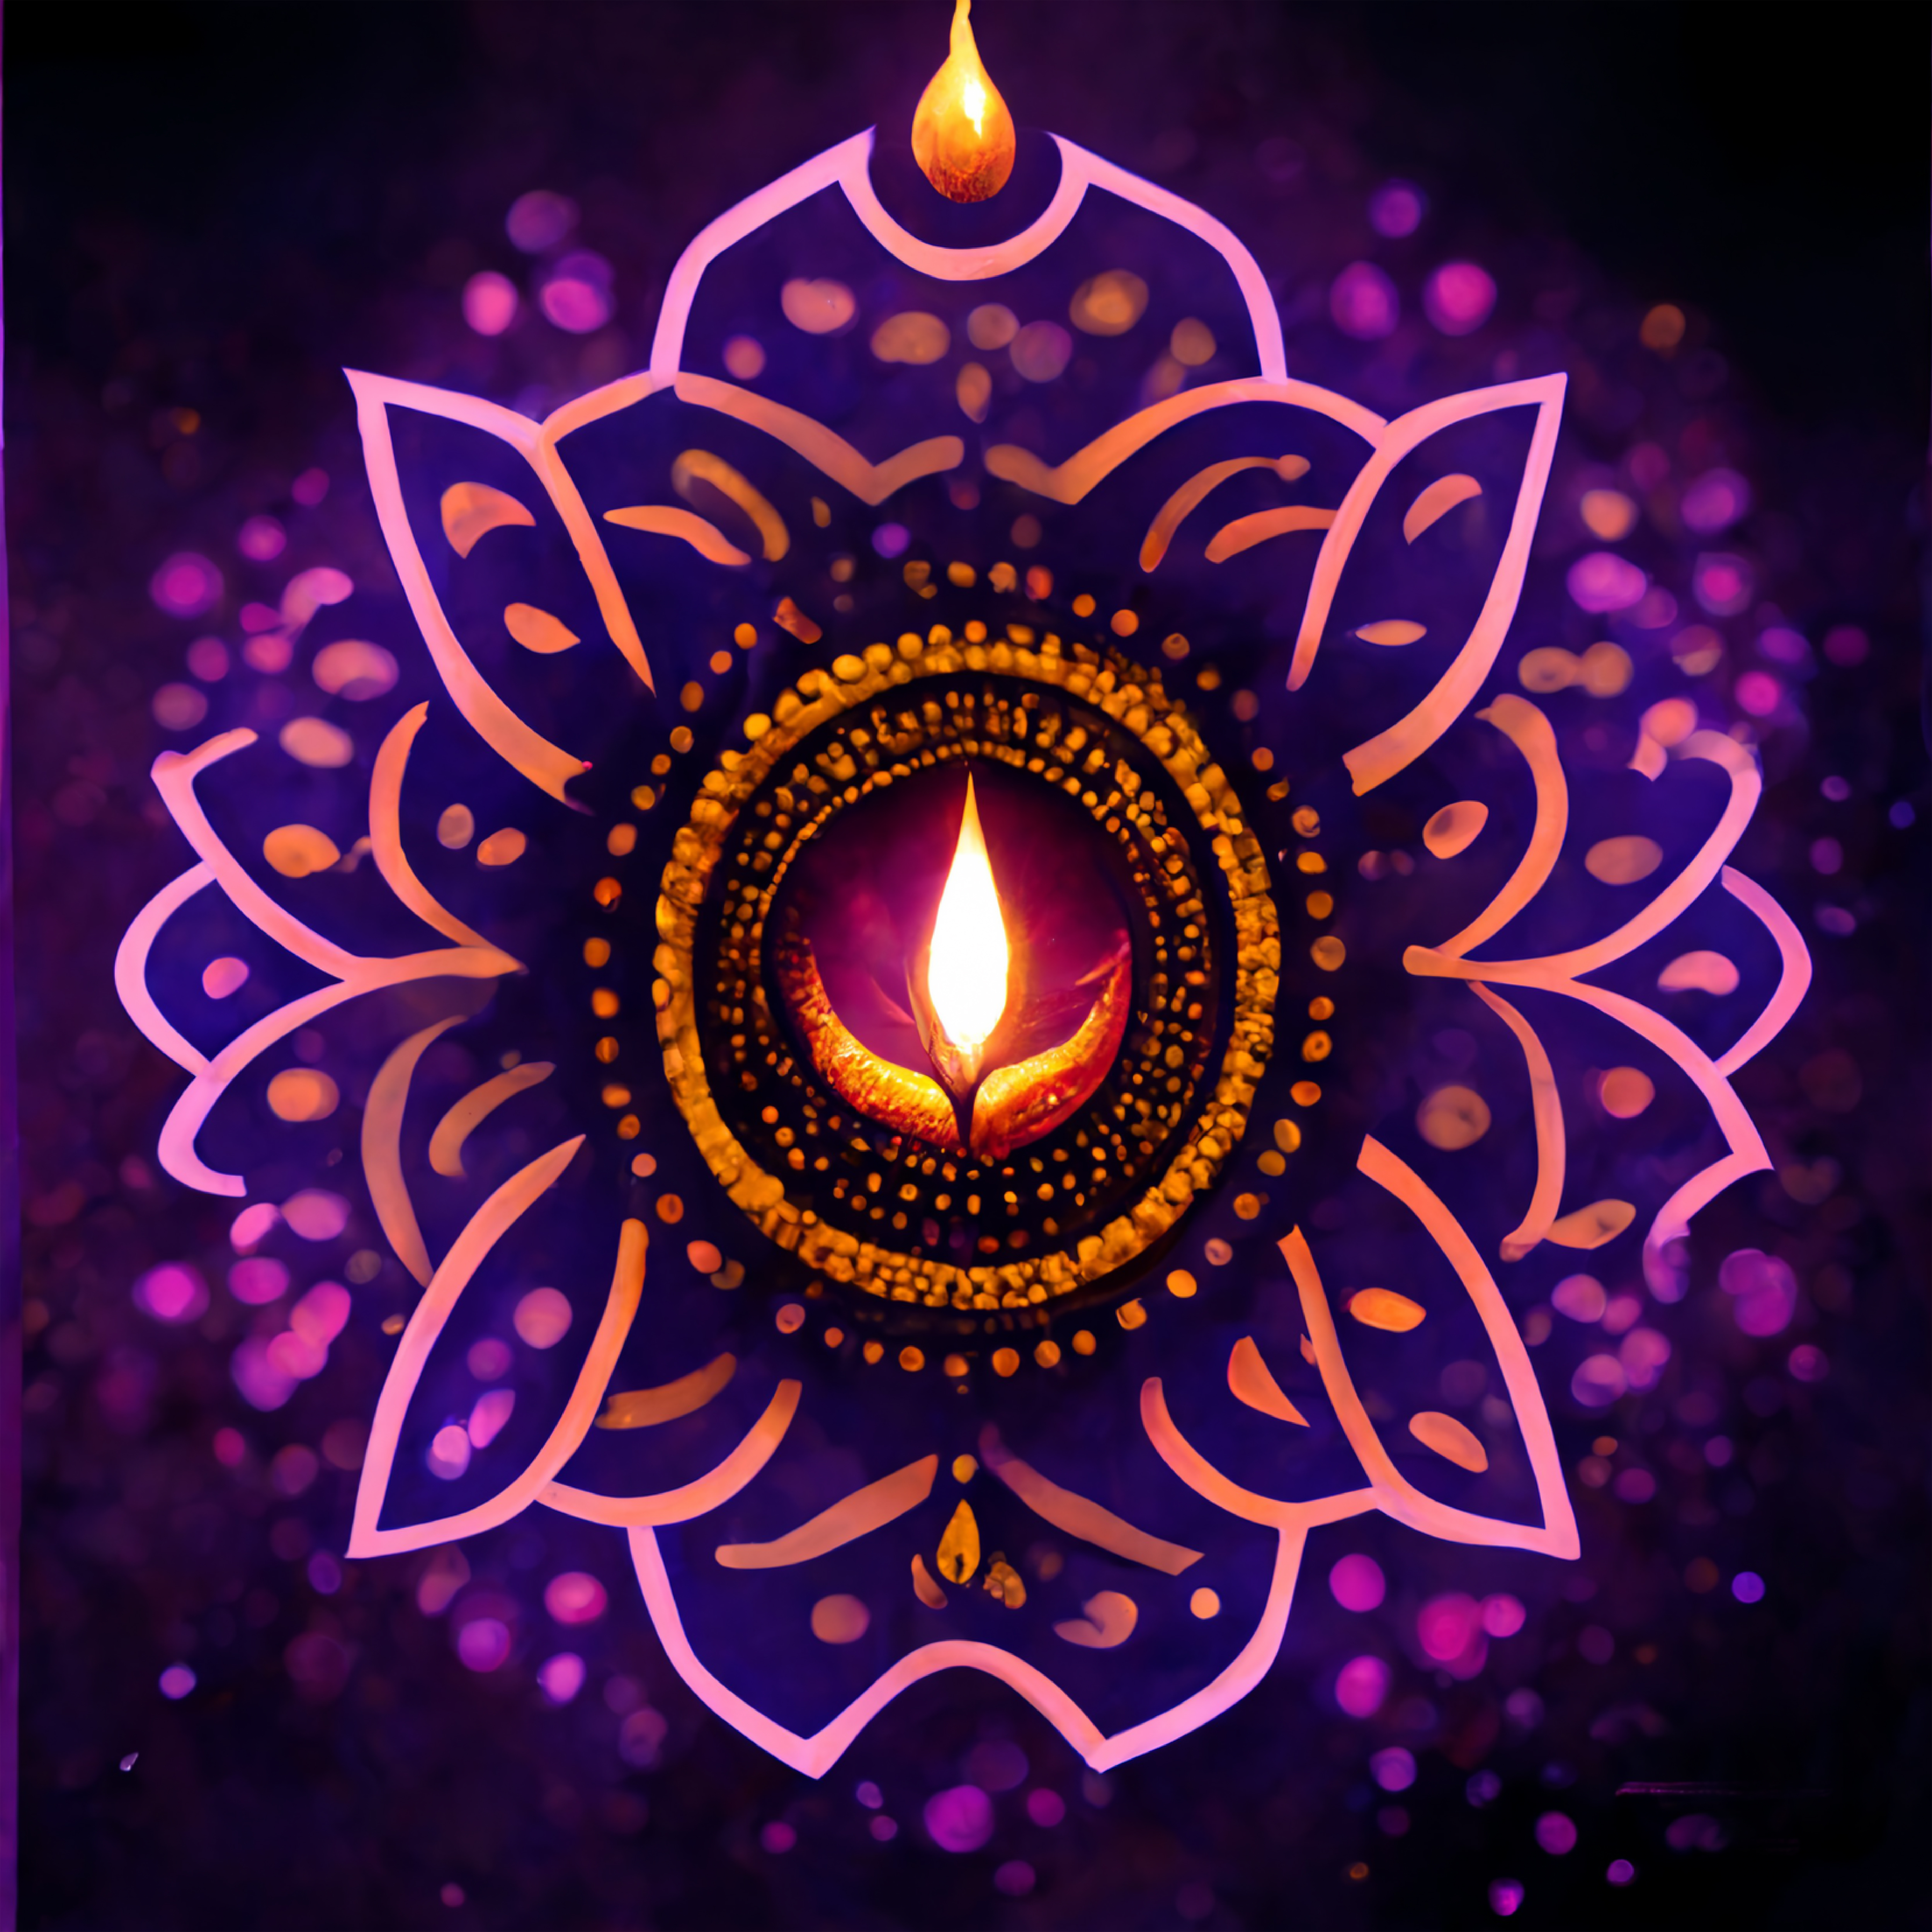 Buy Happy Diwali Wallpaper Diya Deepak Festival Decor Poster Art Wall  Decoration Stickers for Diwali Occasion Wall Decal 90cm X 60 cm Online at  Low Prices in India  Amazonin